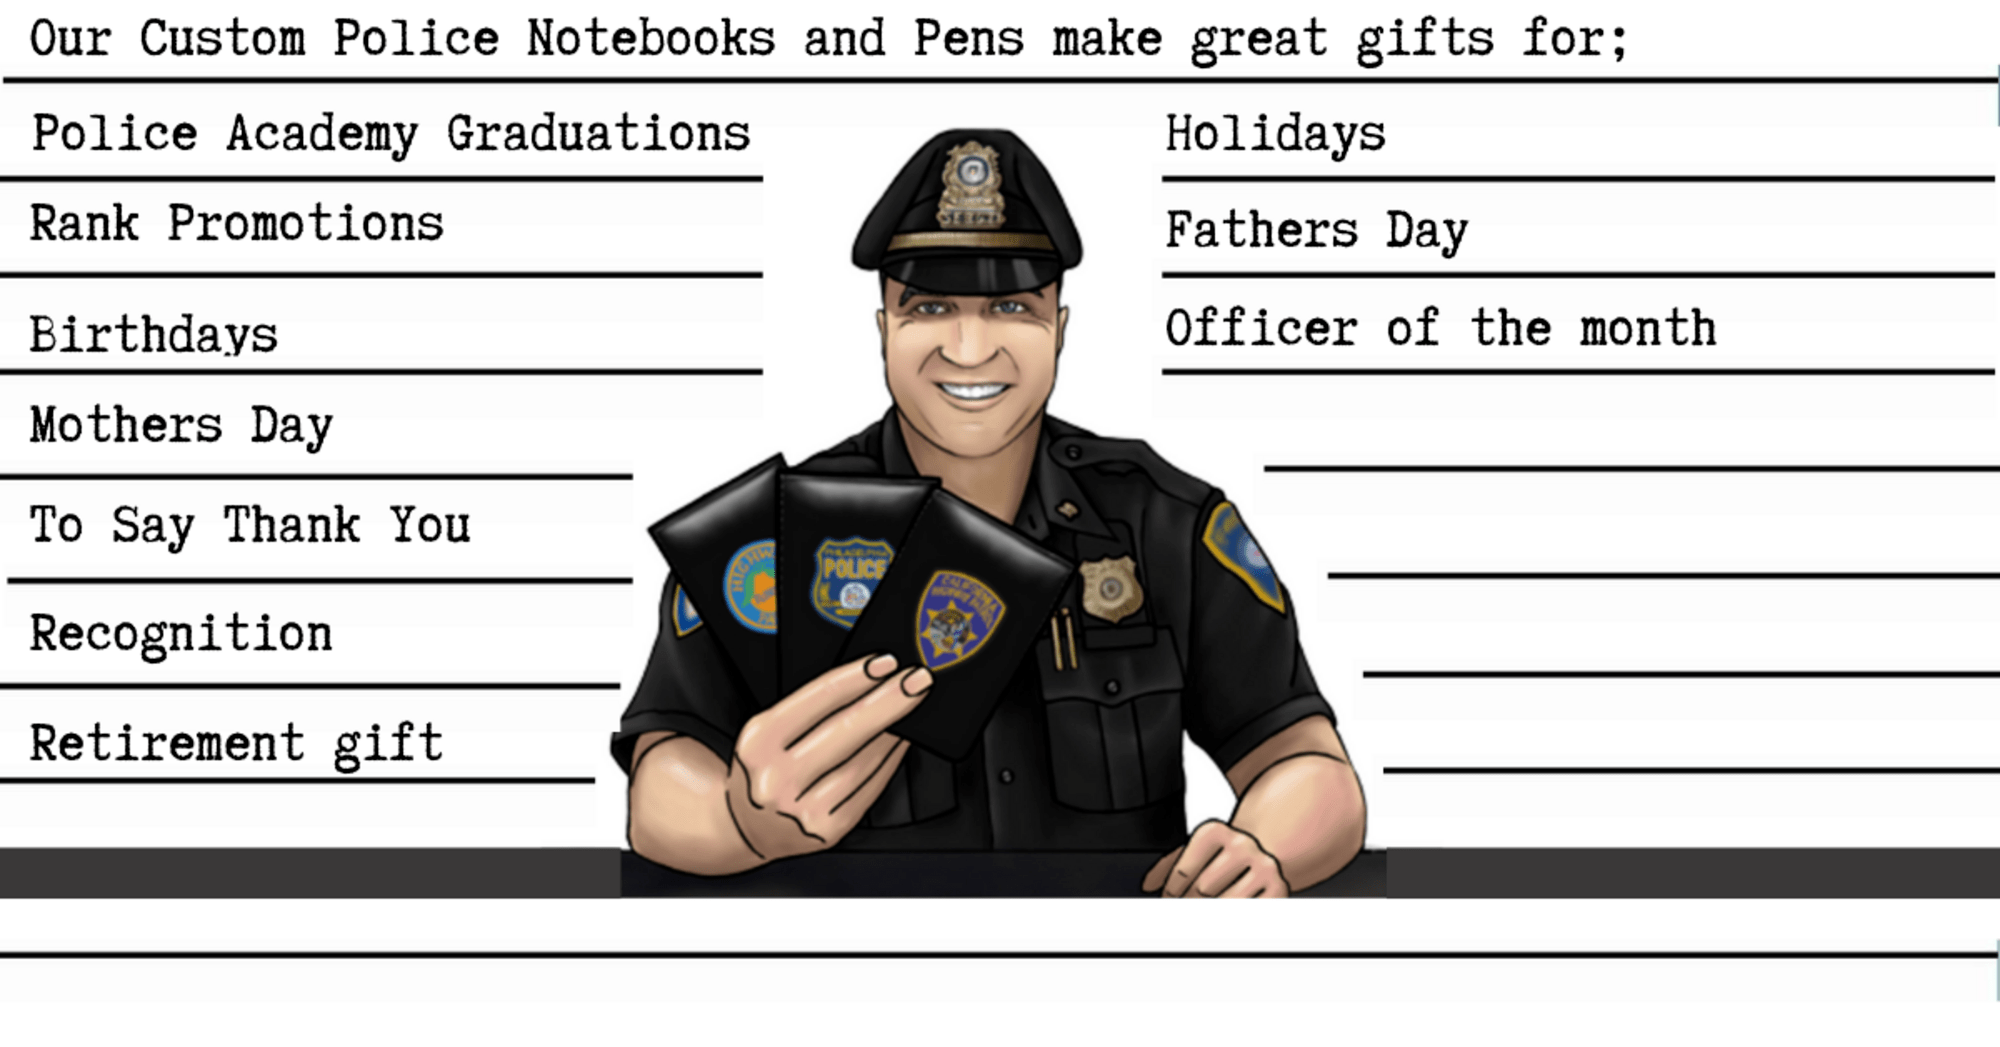 COPJOT Police Notebooks and Pens | Home Page Slider | Police Officer Gift | Cop notepad | Police Academy Graduation Gift | Police Gift for him 